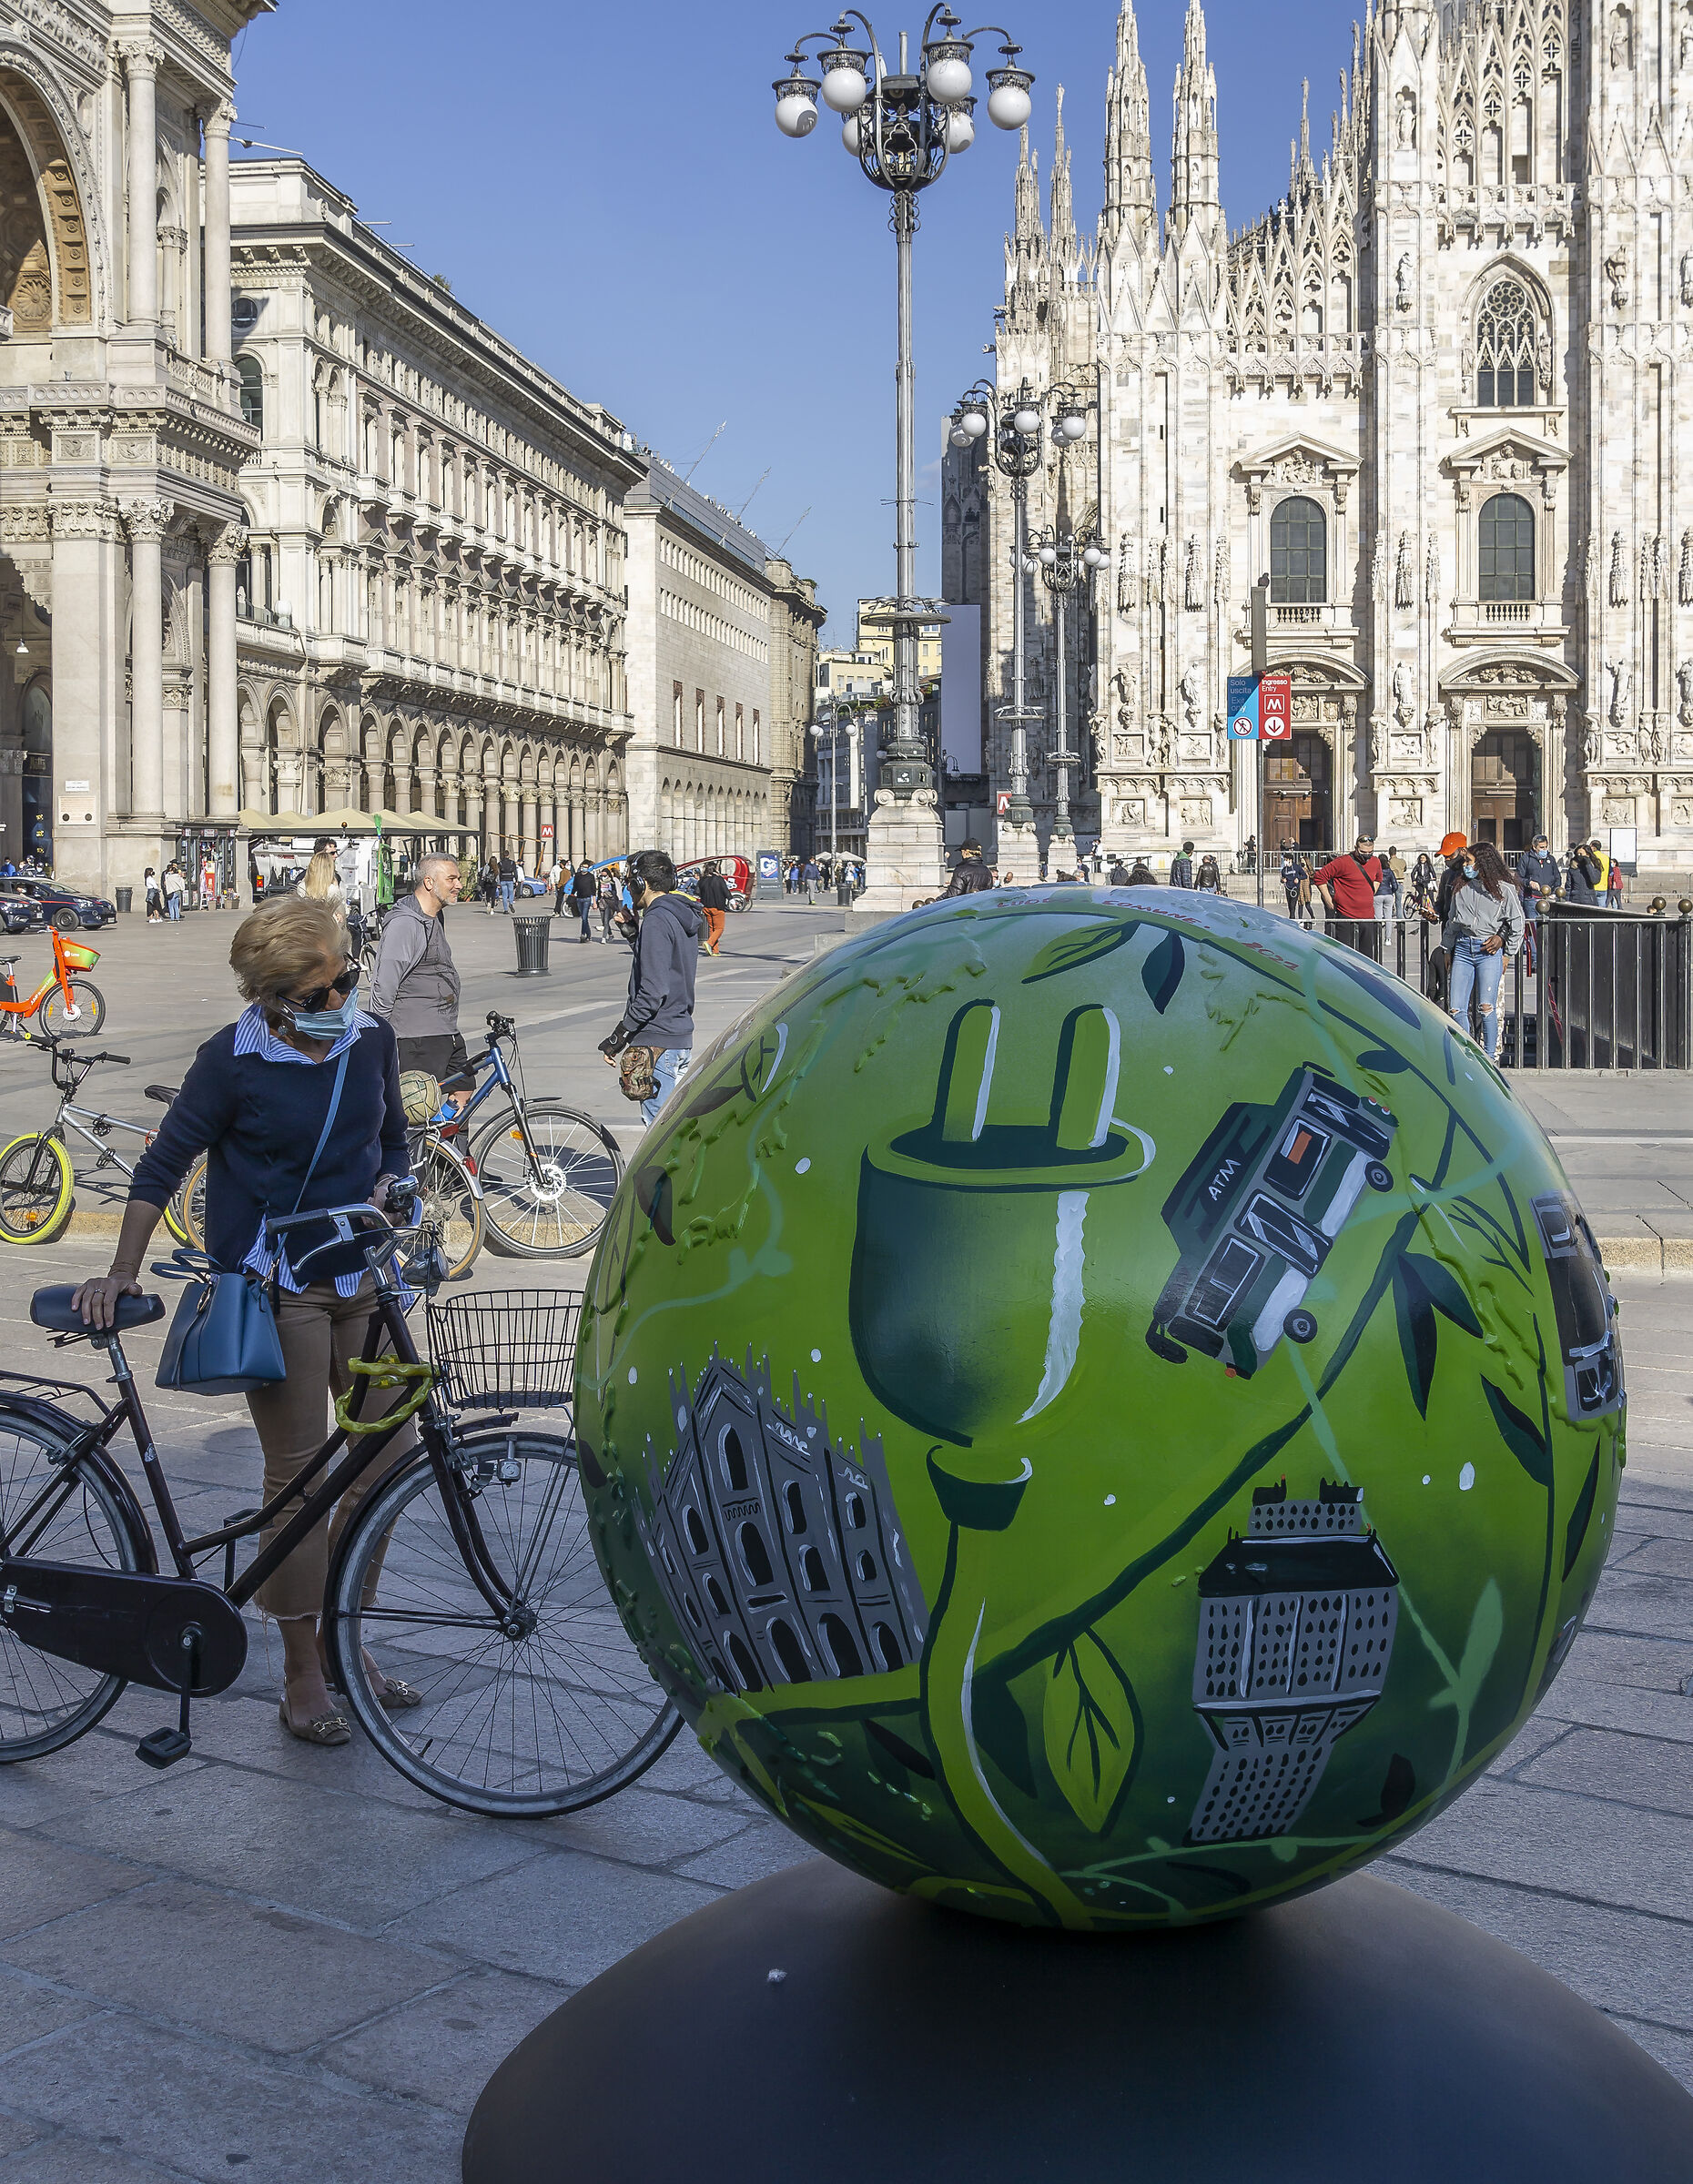 WePlanet - Easter 2021 in Piazza del Duomo. 16:16:14...